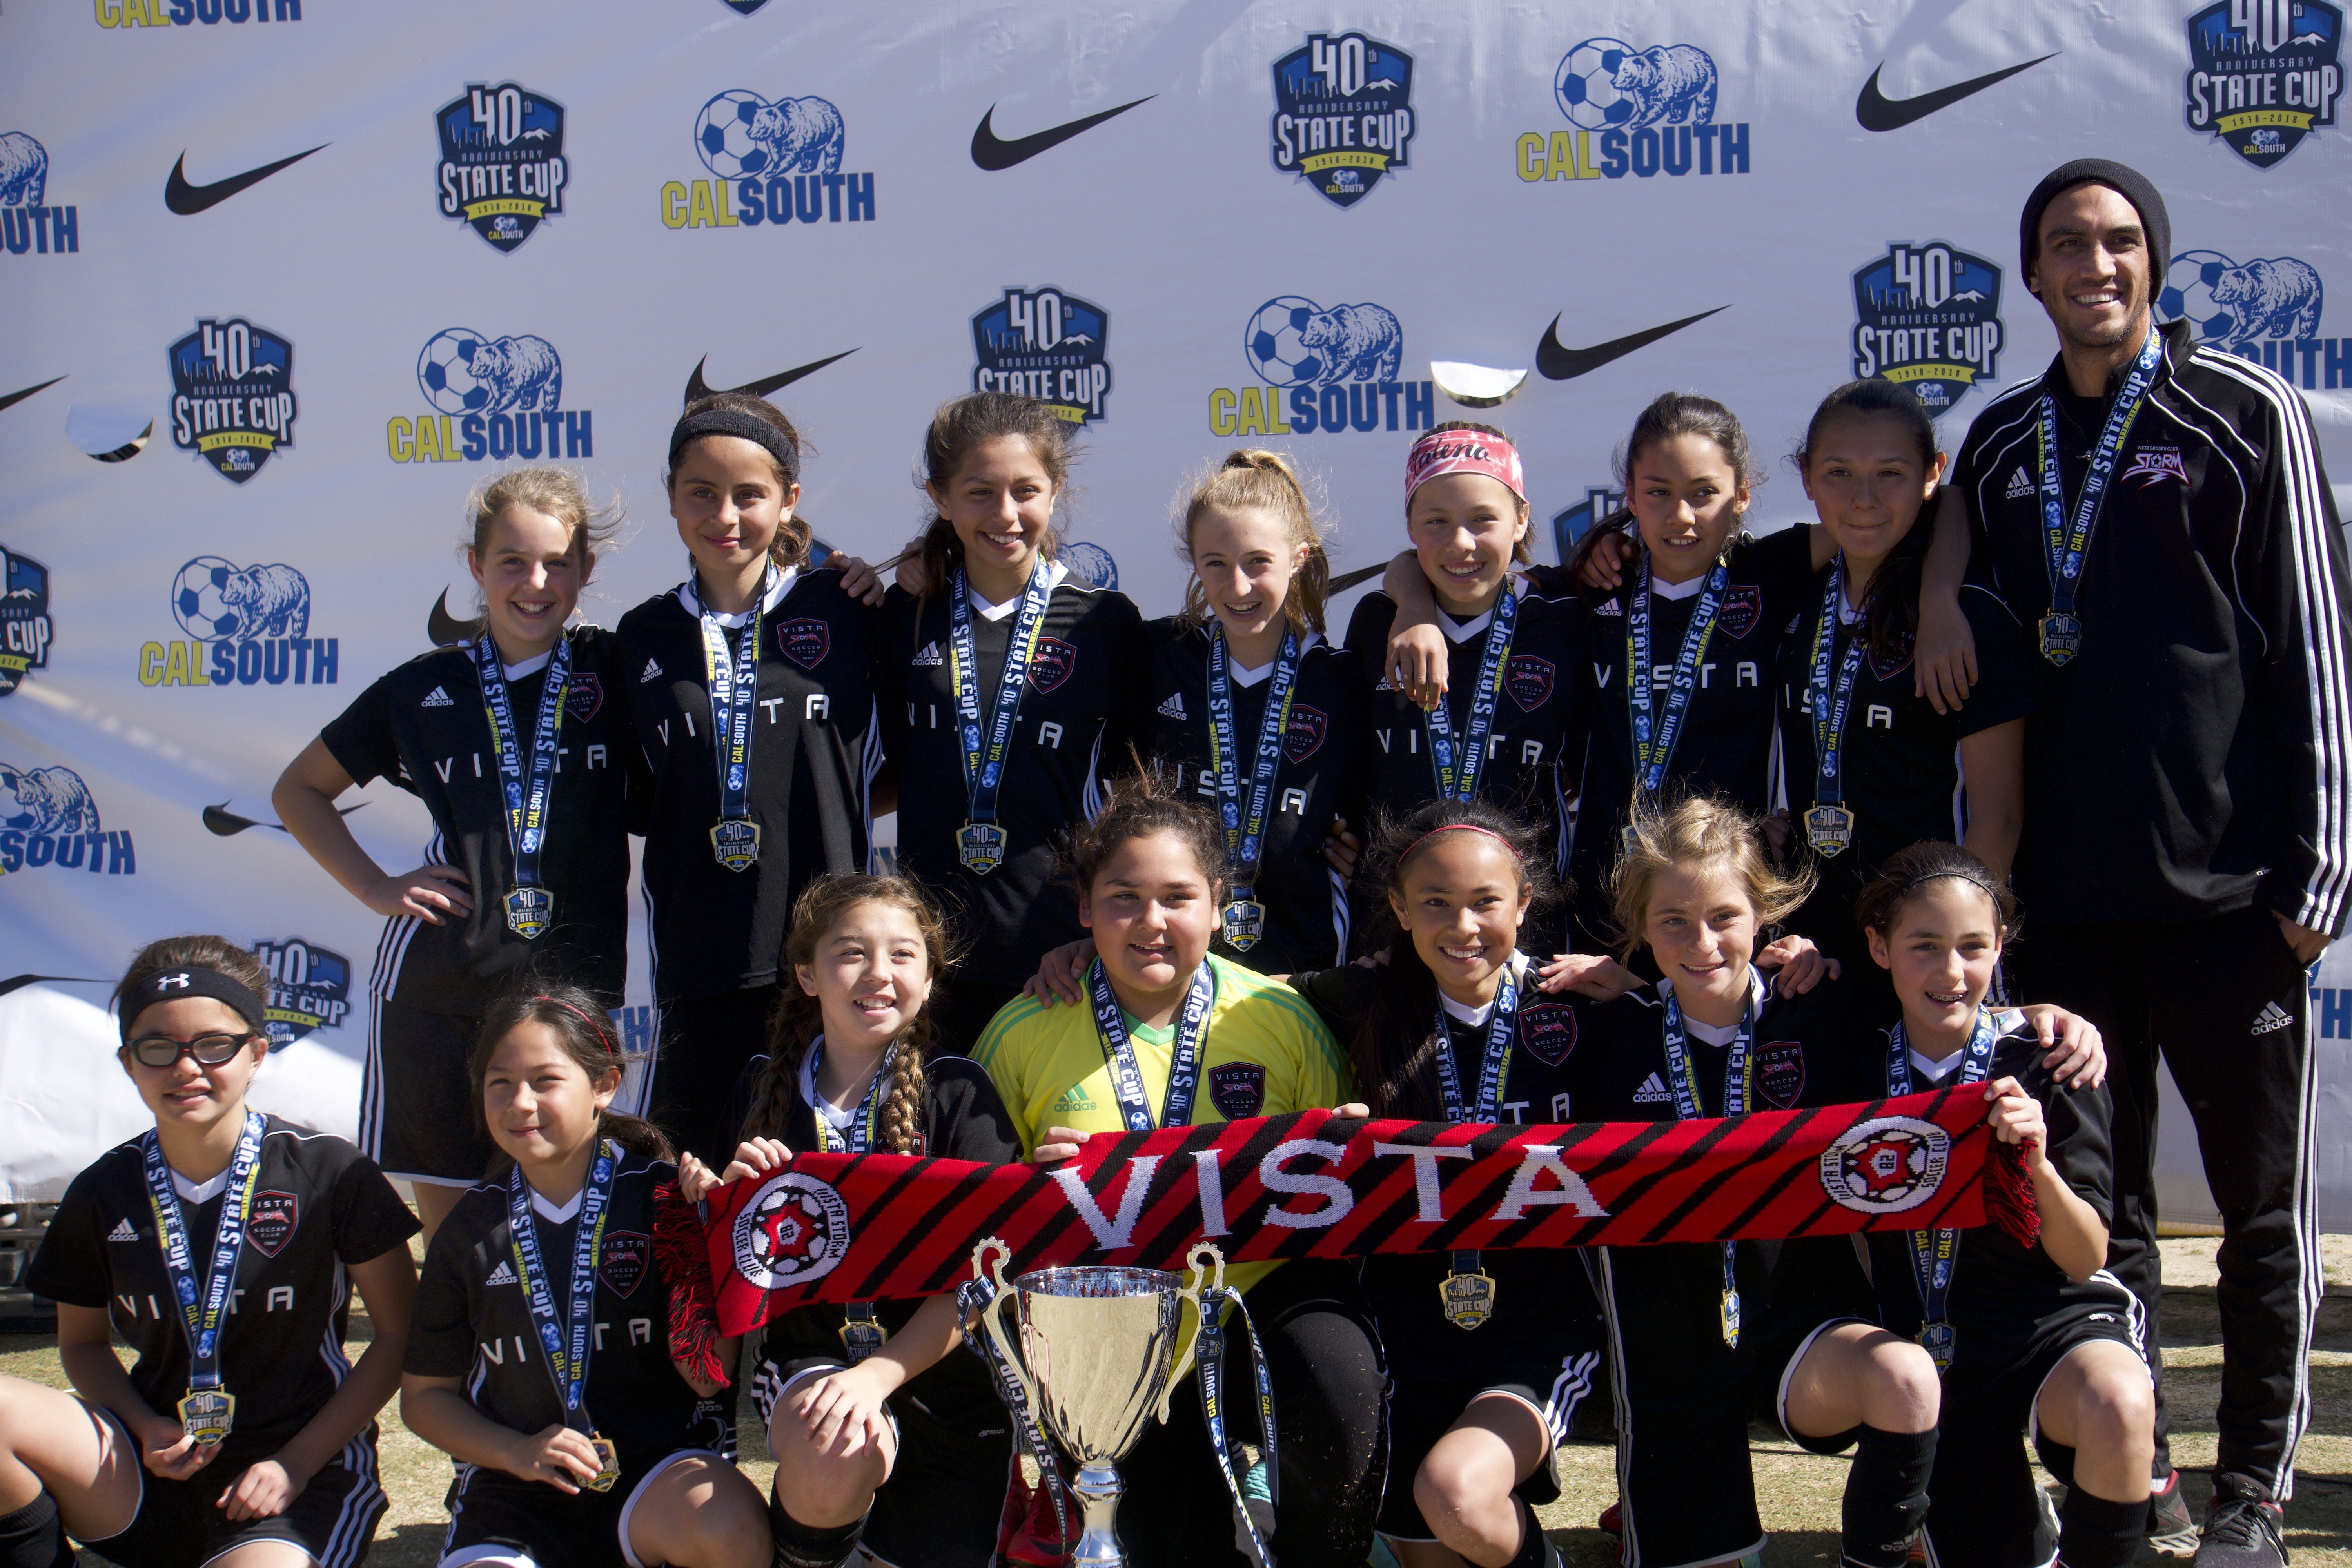 2006 Girls are Crowned Cal South Champions